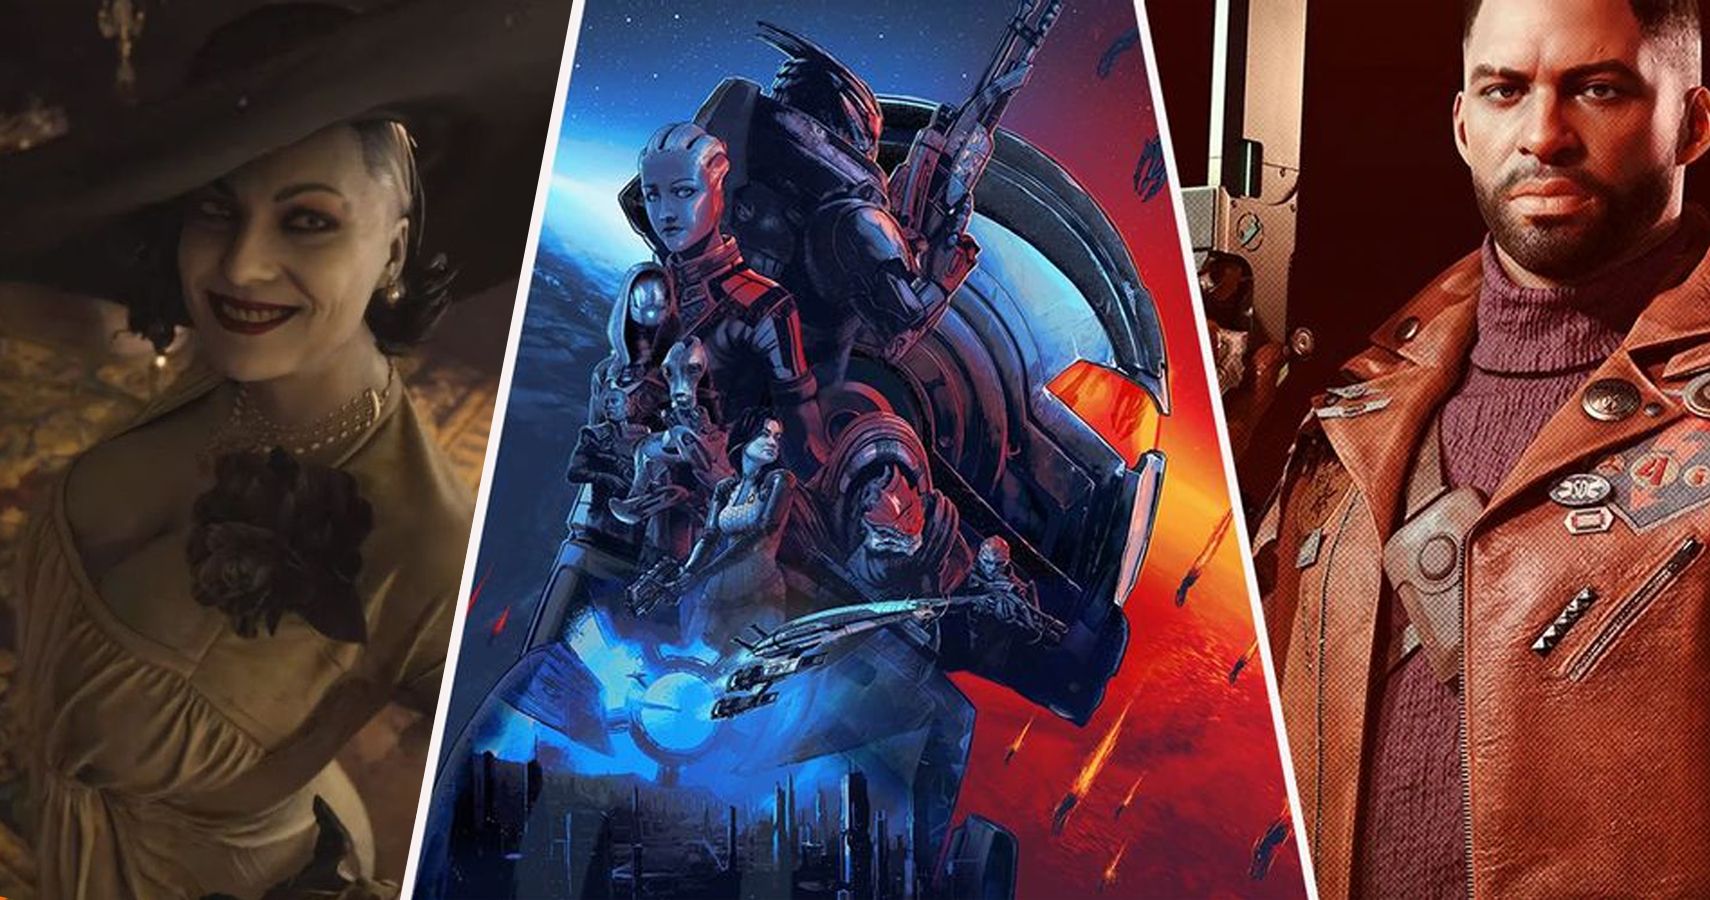 Here's the Download Size and Price for Games Releasing in March 2021